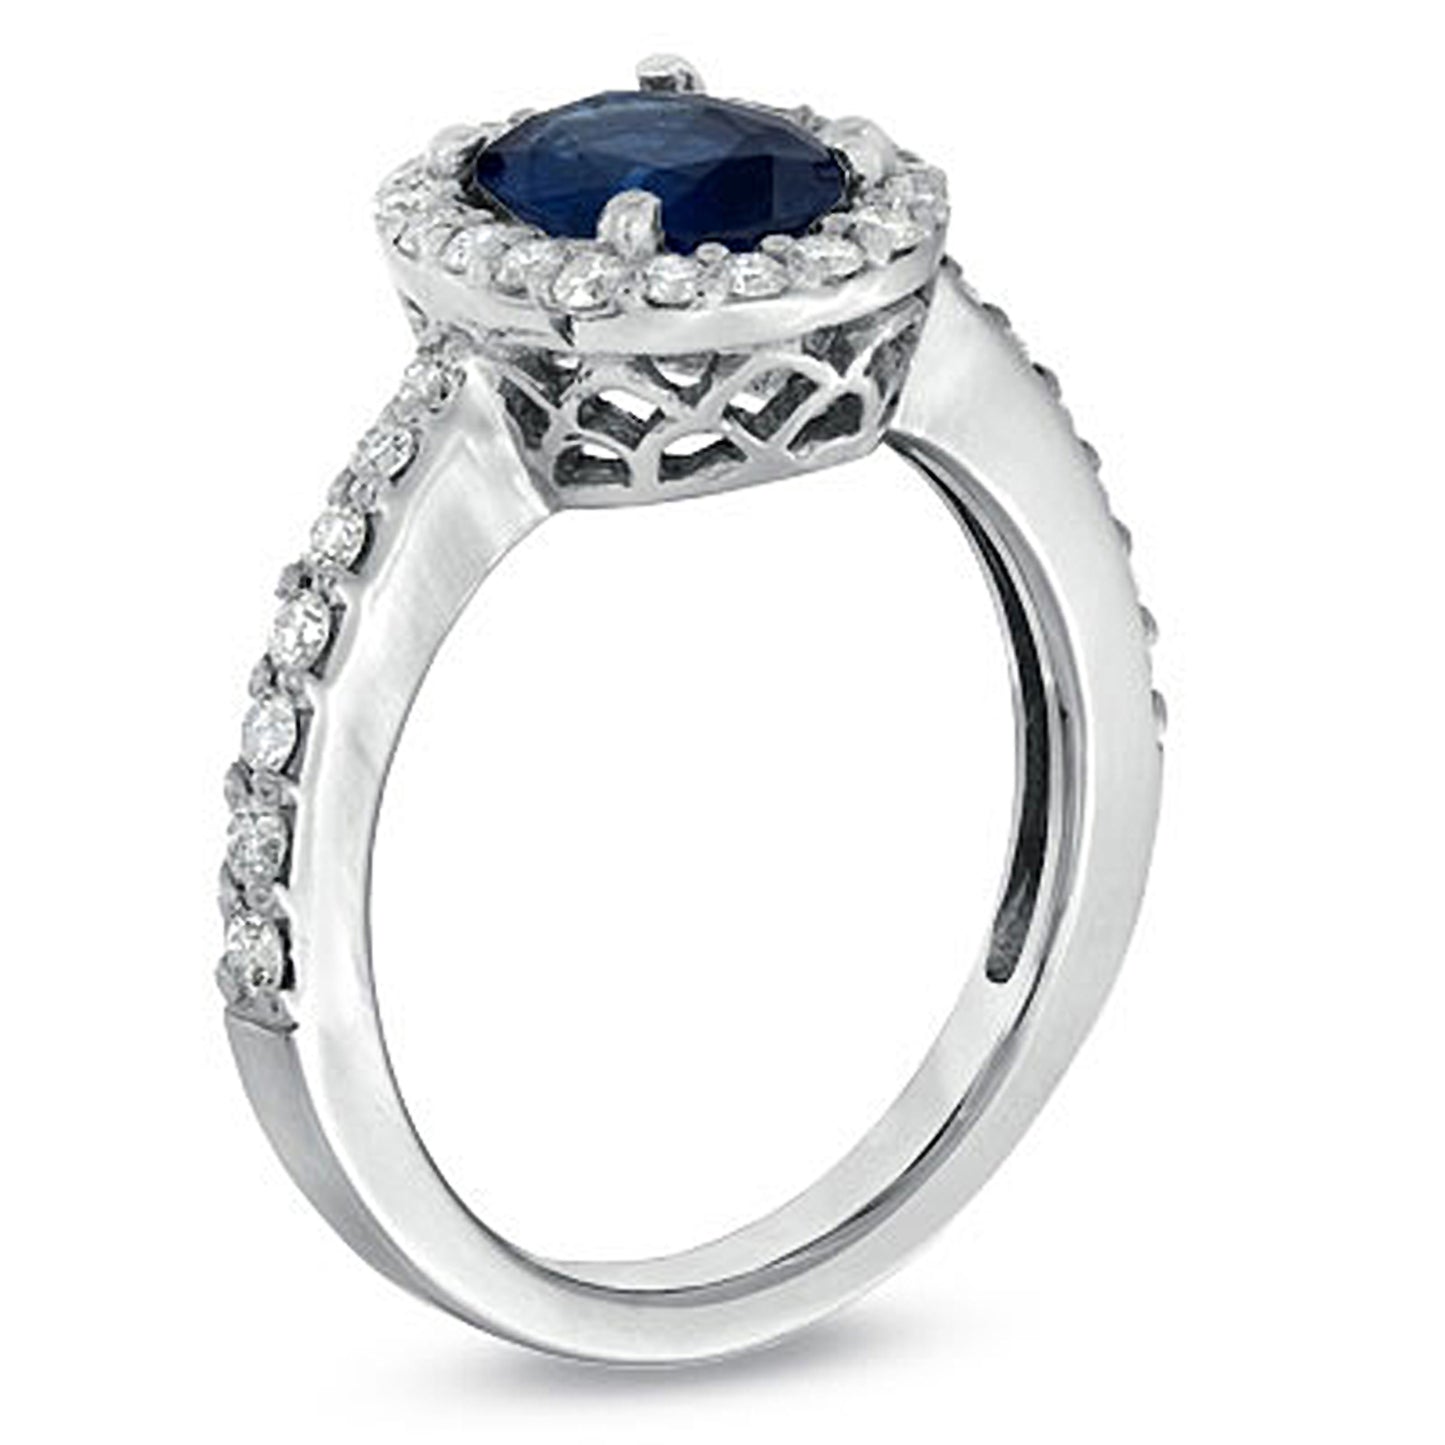 1 8/9ct Blue Sapphire & Diamond Halo Engagement Ring in 14k White Gold